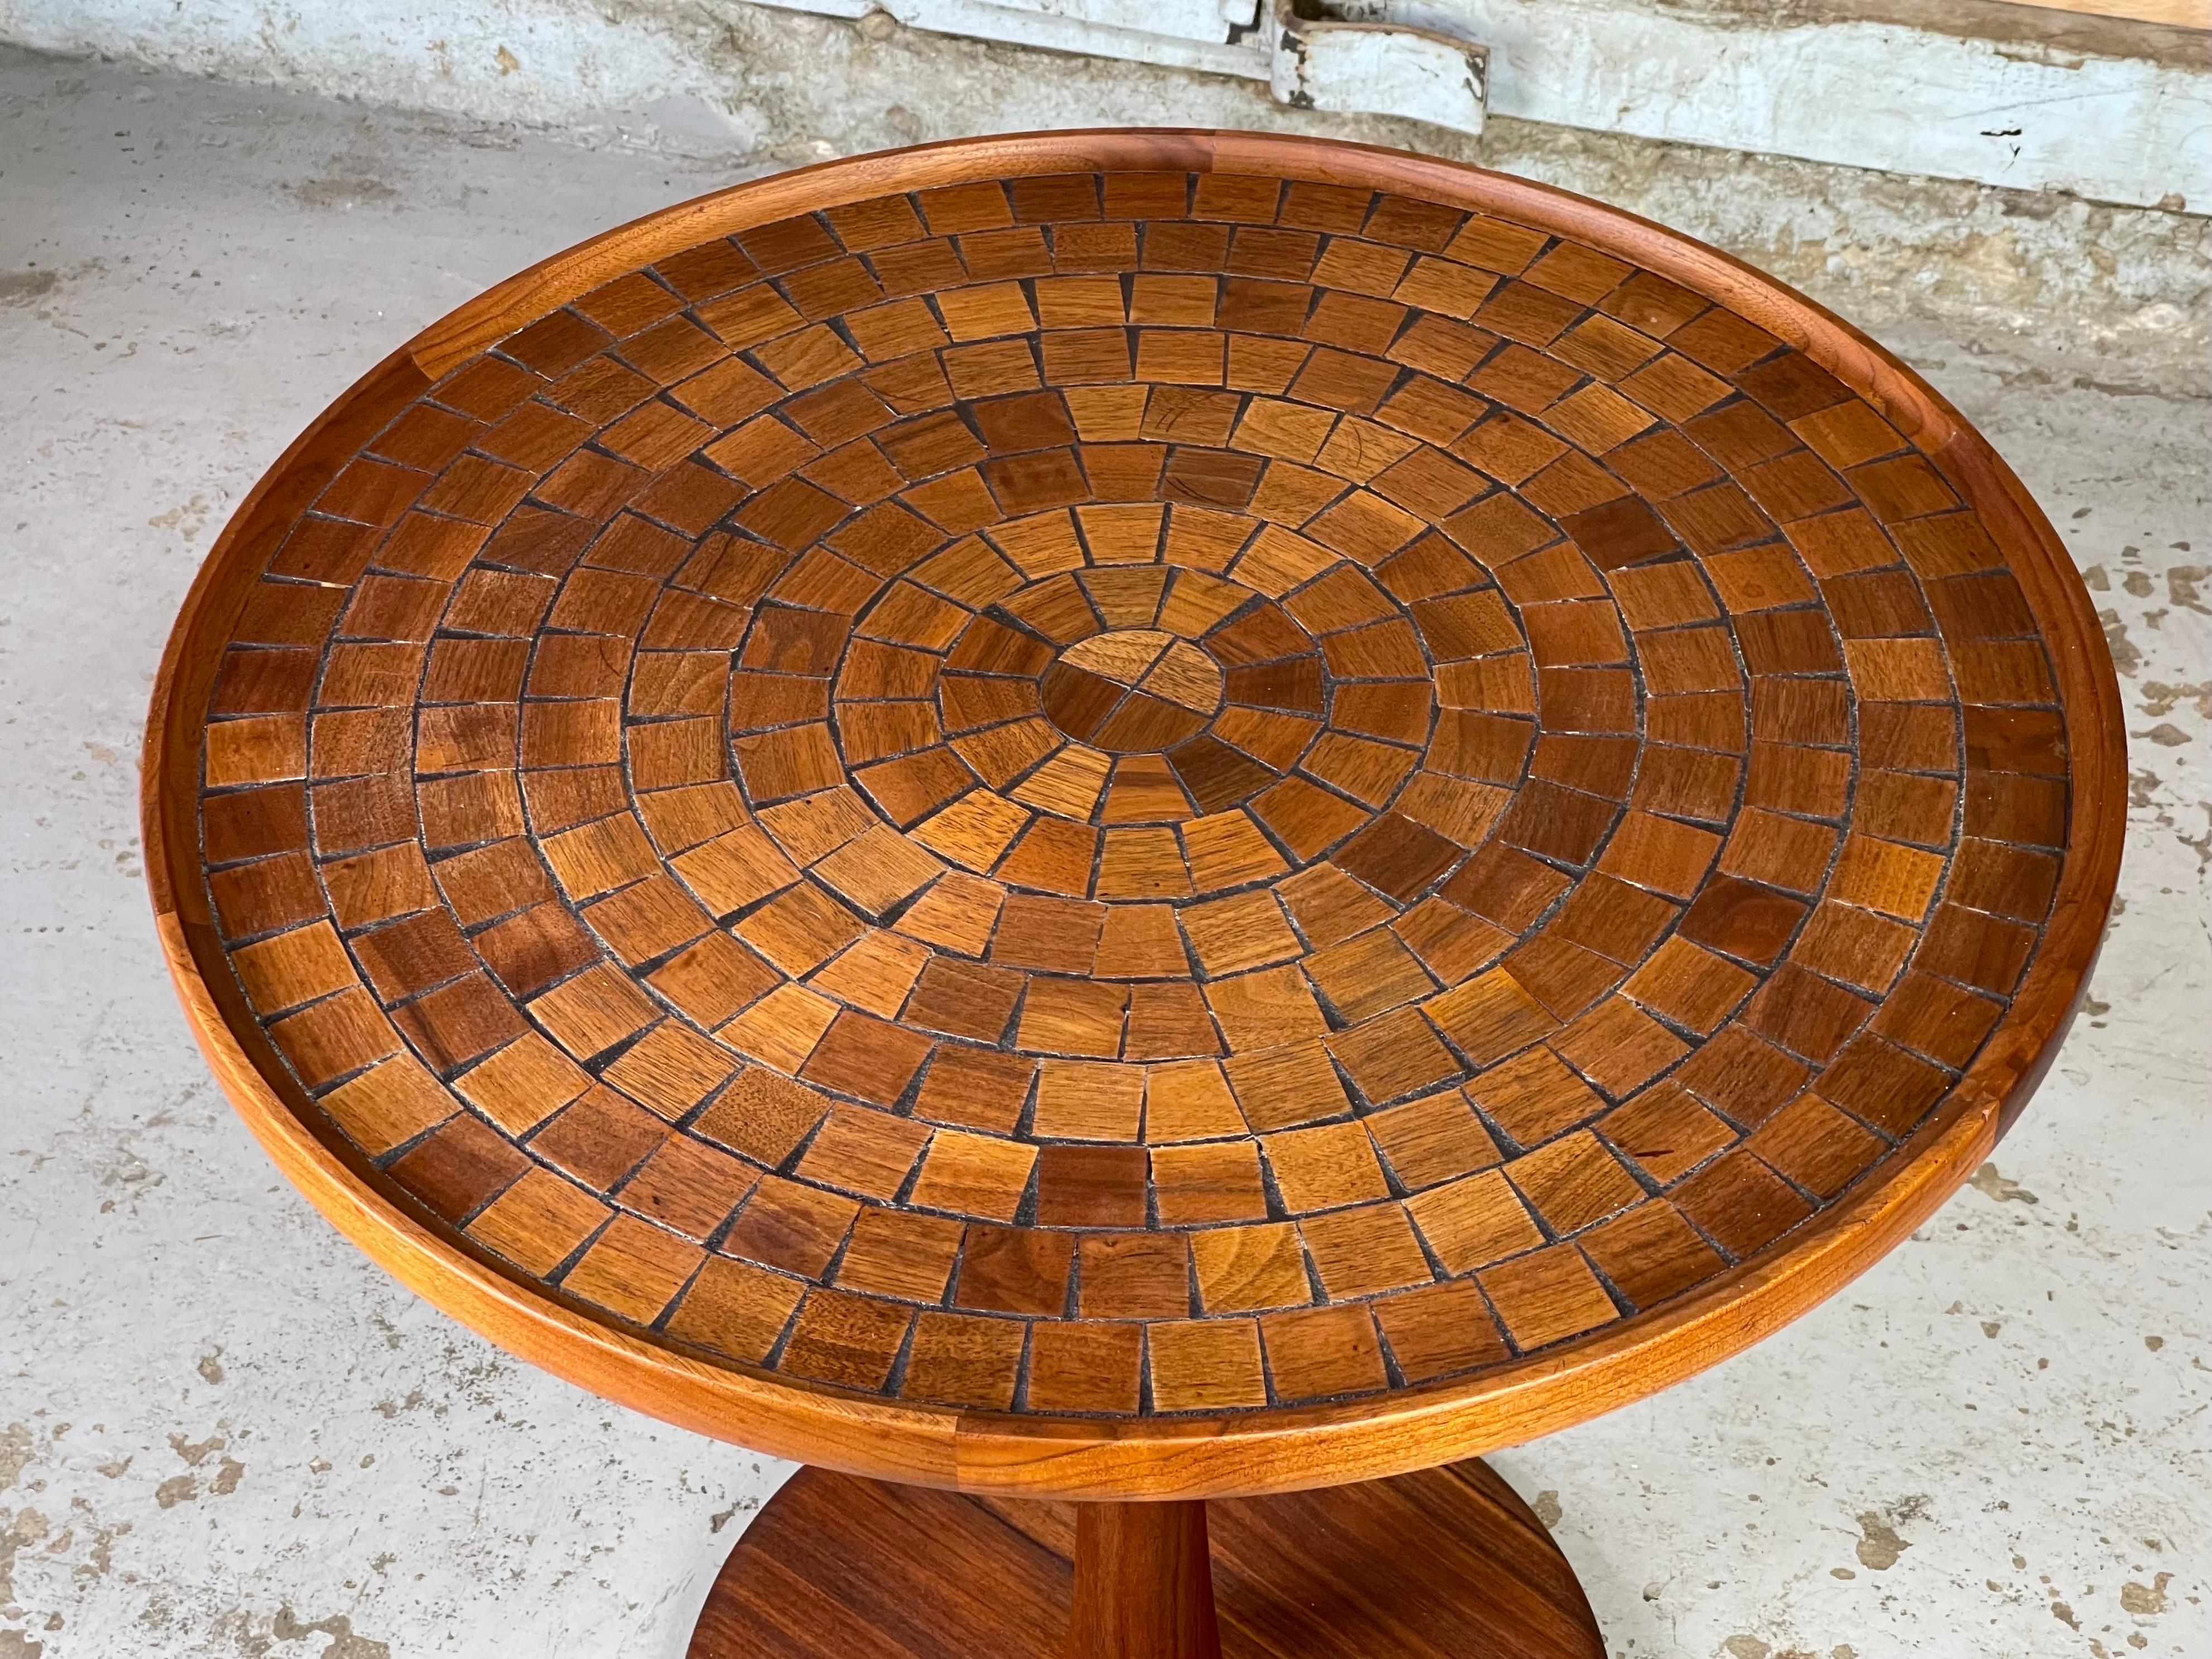 Rare & stunning walnut inlay pedestal table by Jane & gordon Martz for Marshall Studios. This is the first non-tile Martz table I have ever seen. The mosaic walnut cuts have such fantastic colors and grain - it's eye candy and functional. 
Excellent